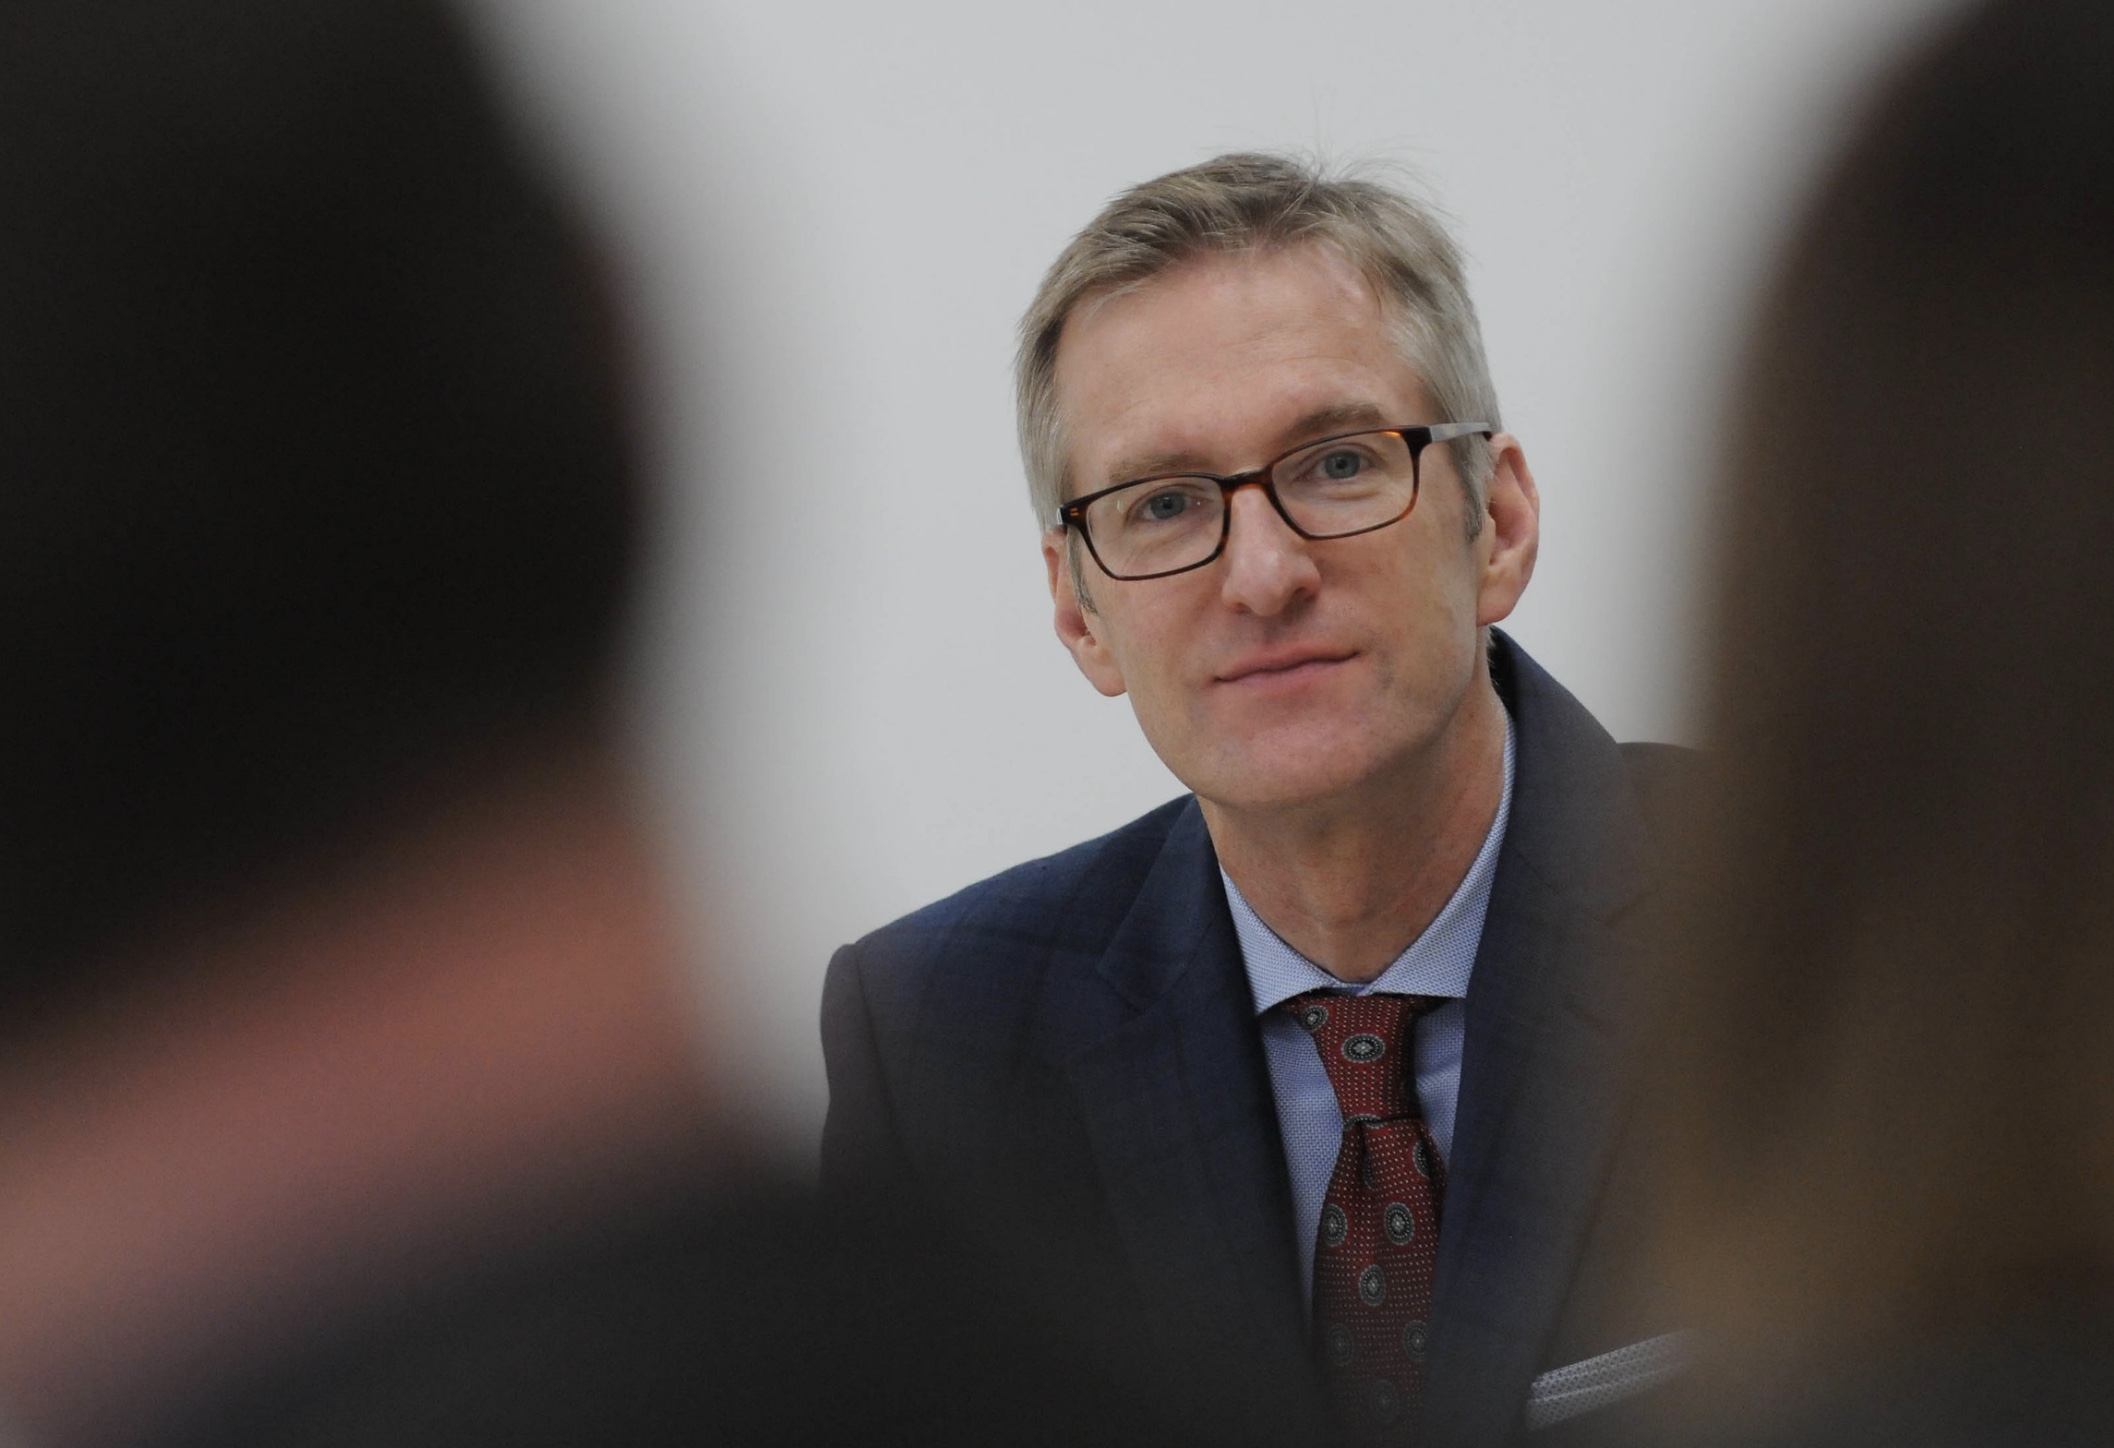 portland mayor ted wheeler looking into the camera at a meeting